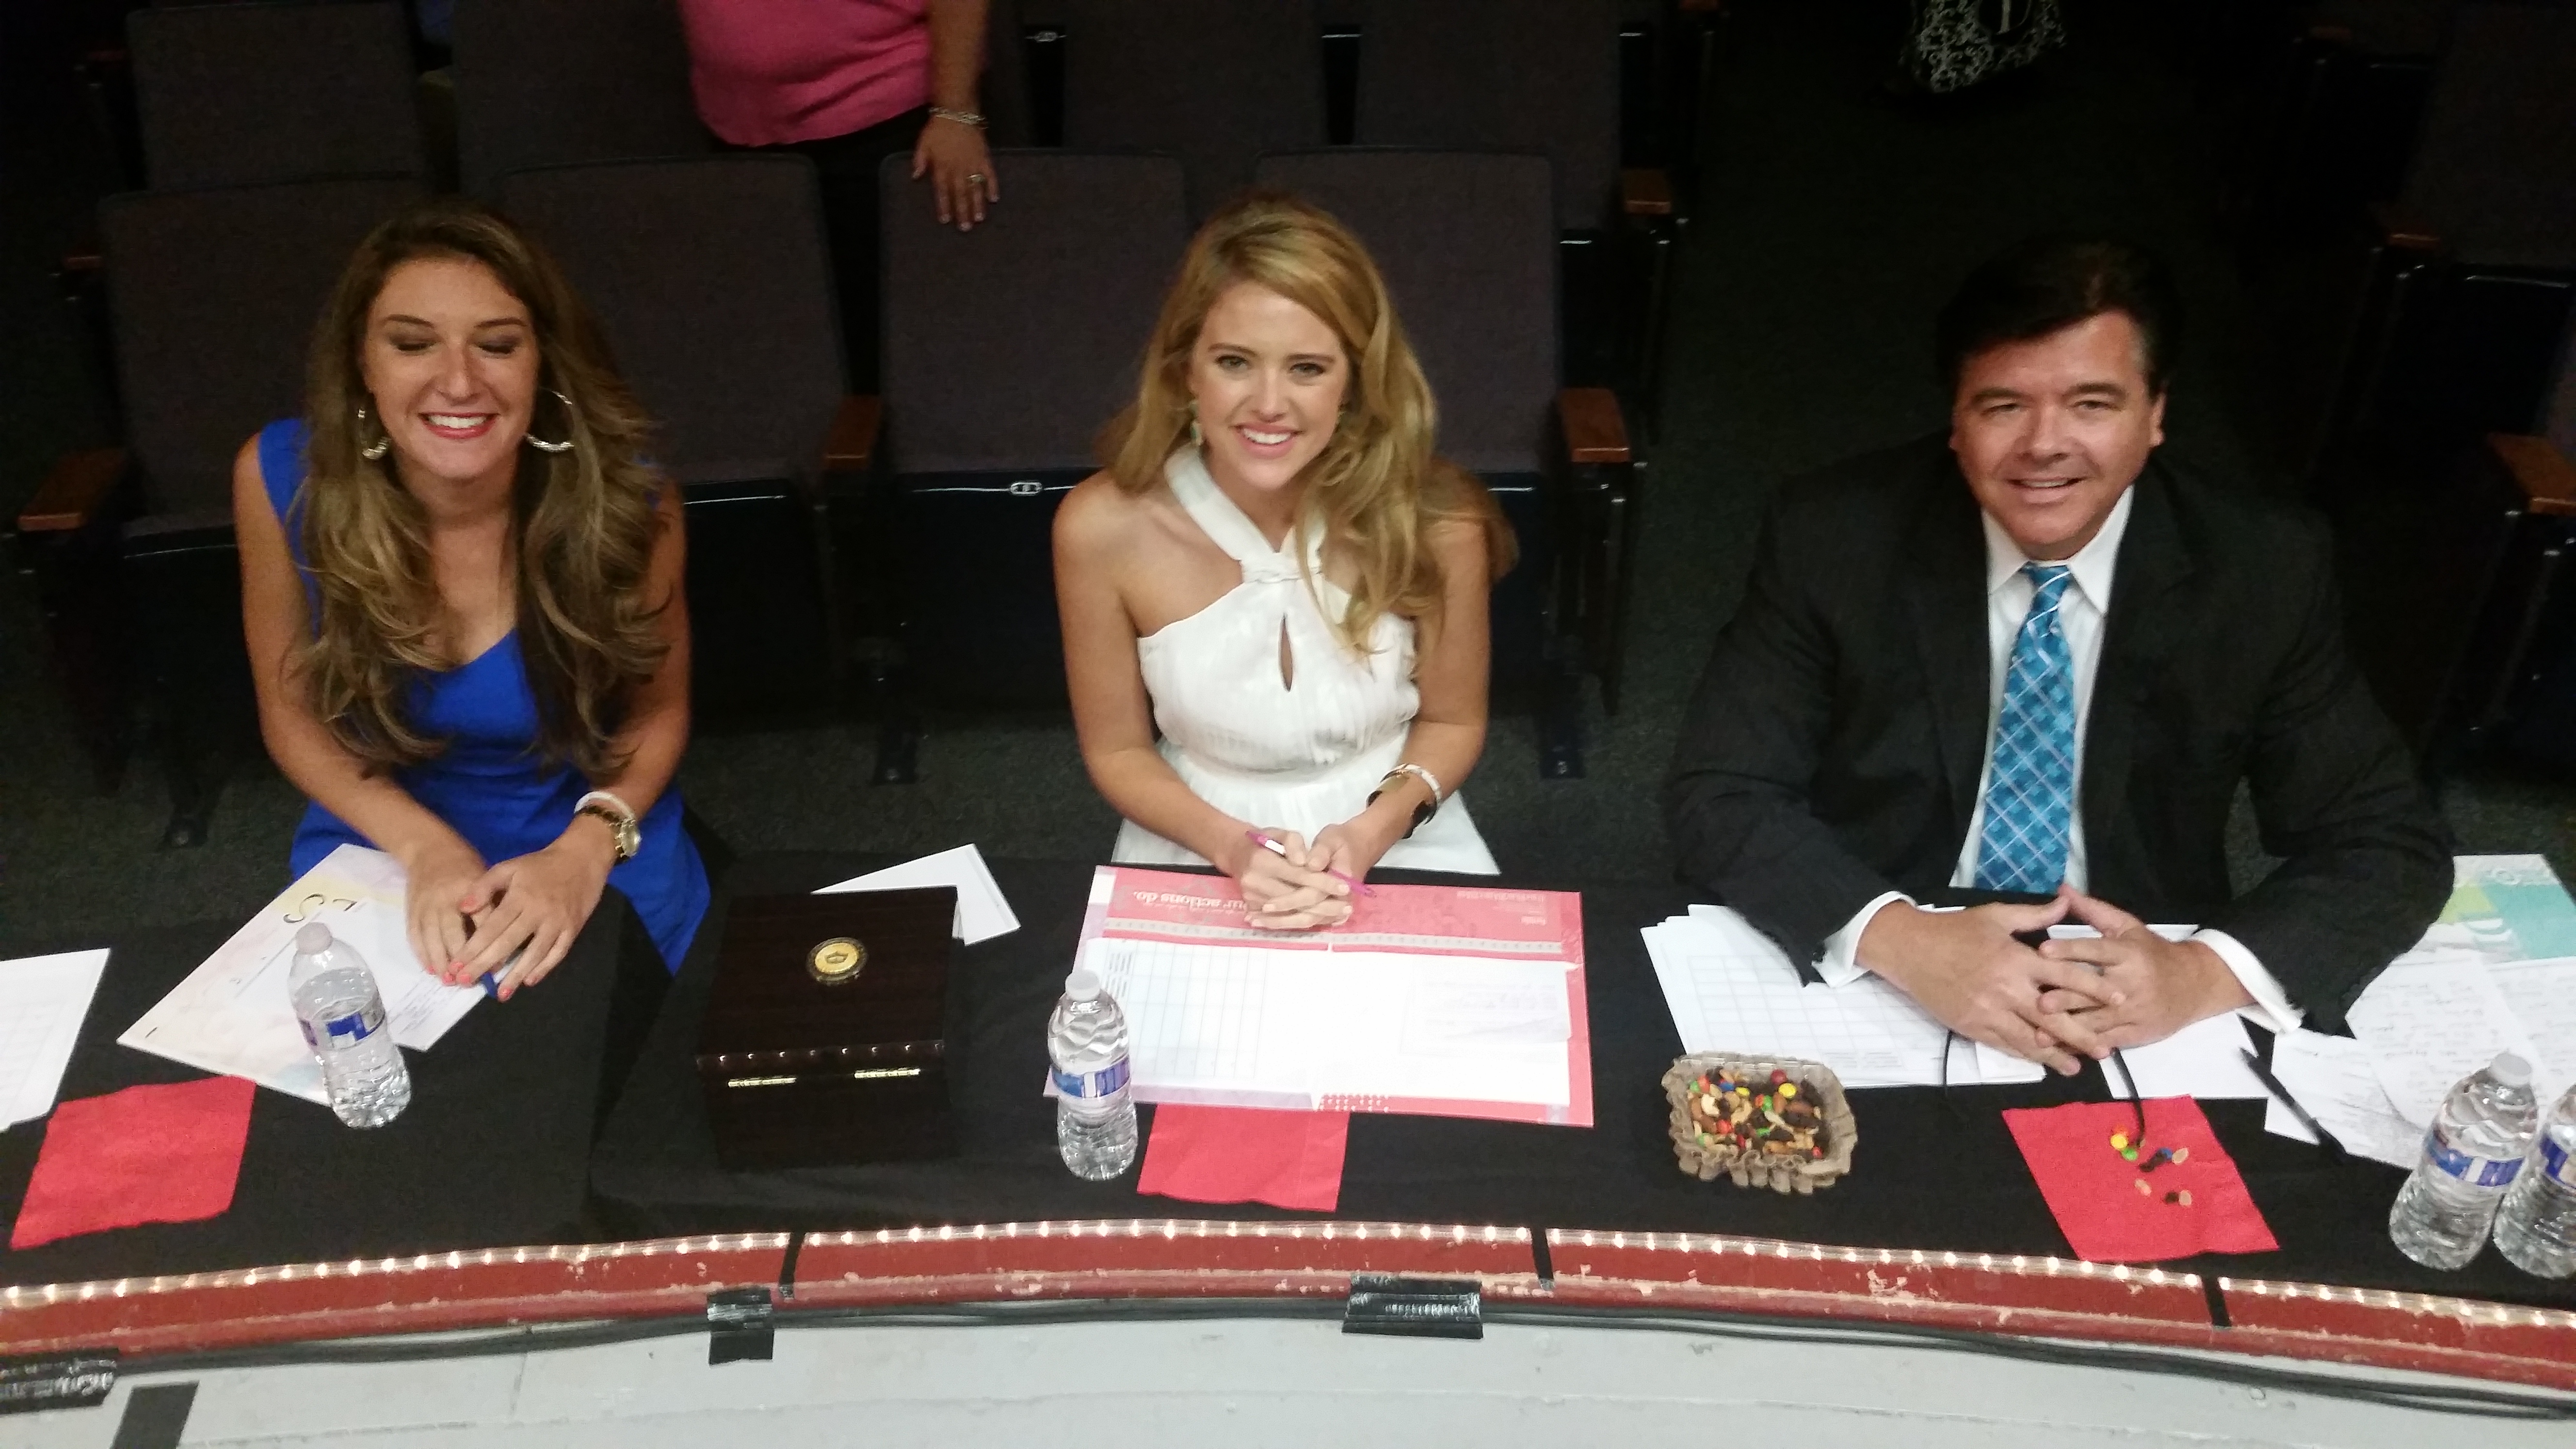 Miss Georgia Girl panel judge. With Miss Georgia Maggie Bridges sitting next to me also judging. I represented the TV and Movie business.